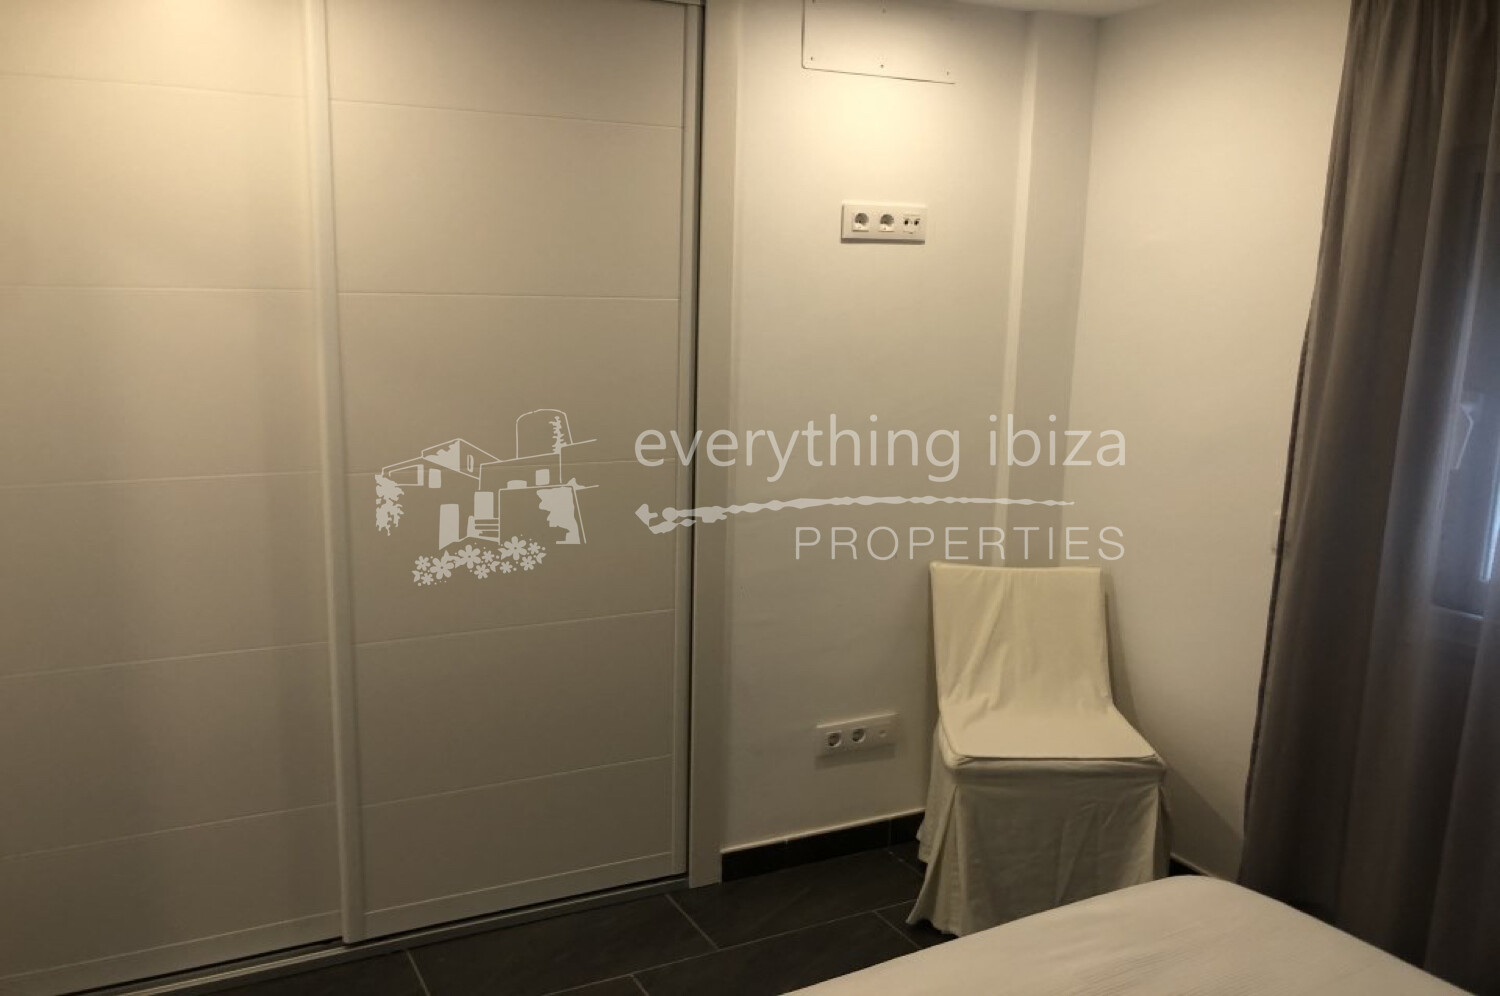 Residential Block with 14 Apartments in Central Santa Eulalia, ref. 1449, for sale in Ibiza by everything ibiza Properties